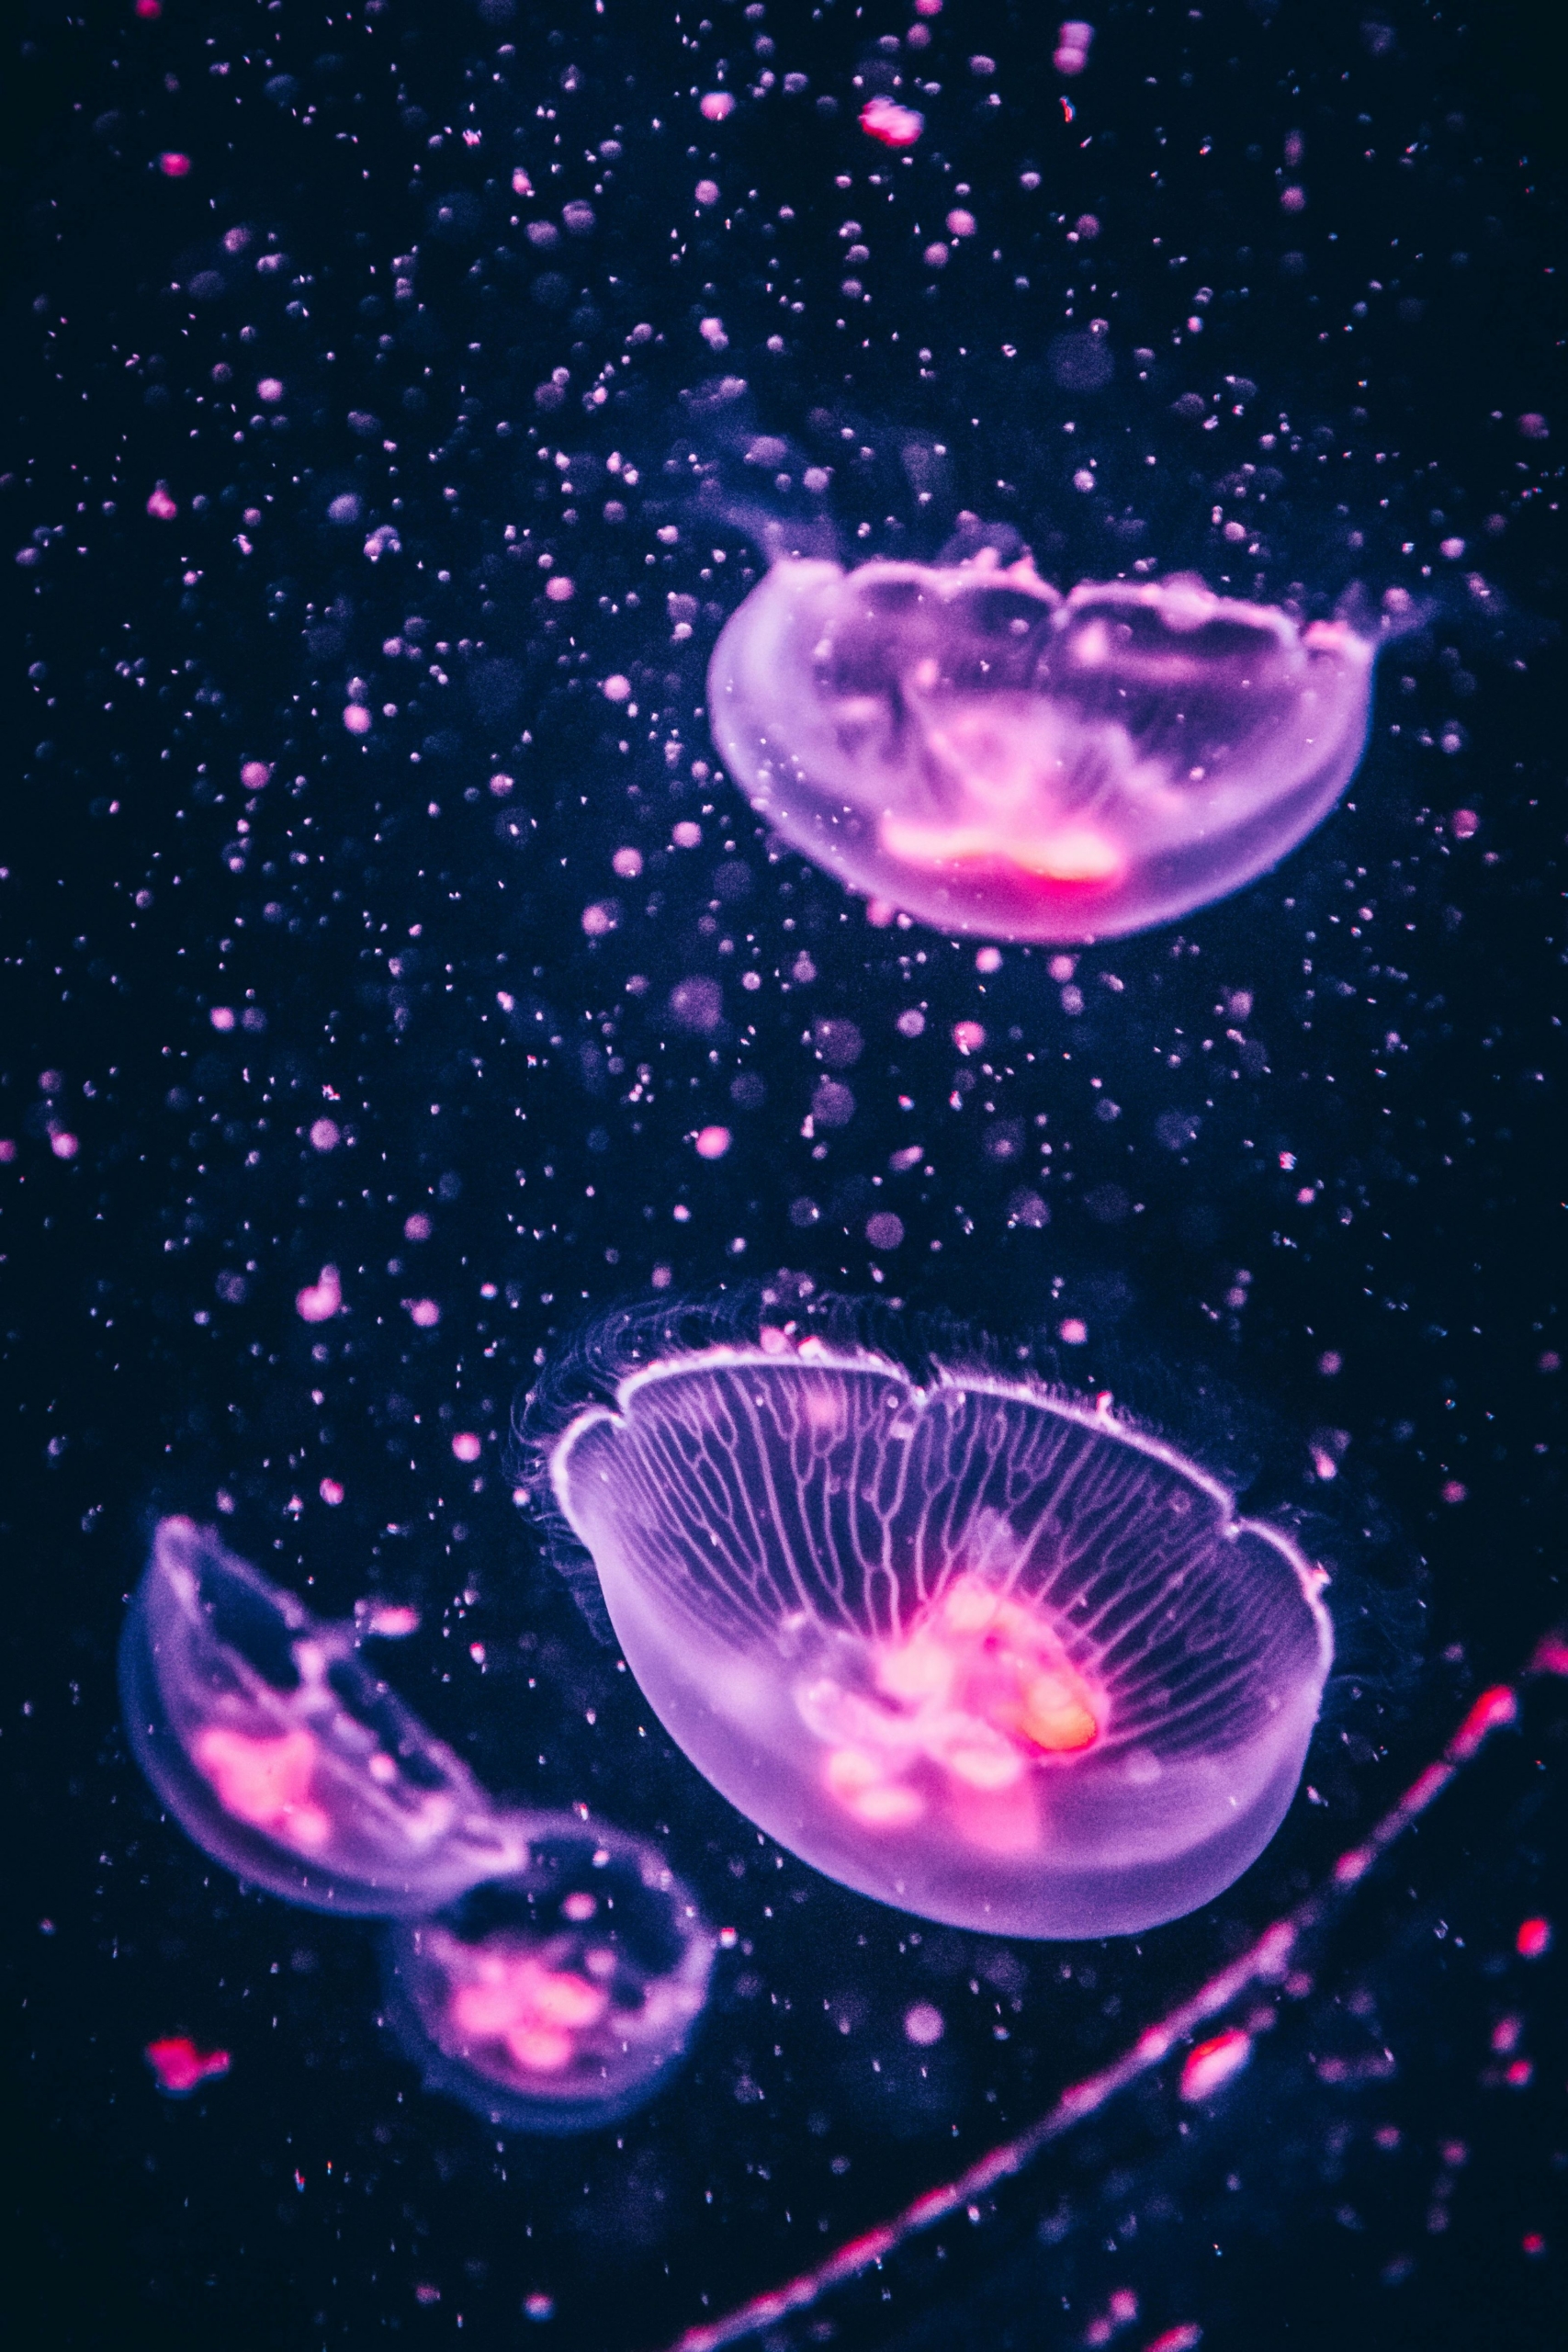 Four translucent pink and purple jellyfish on a dark background